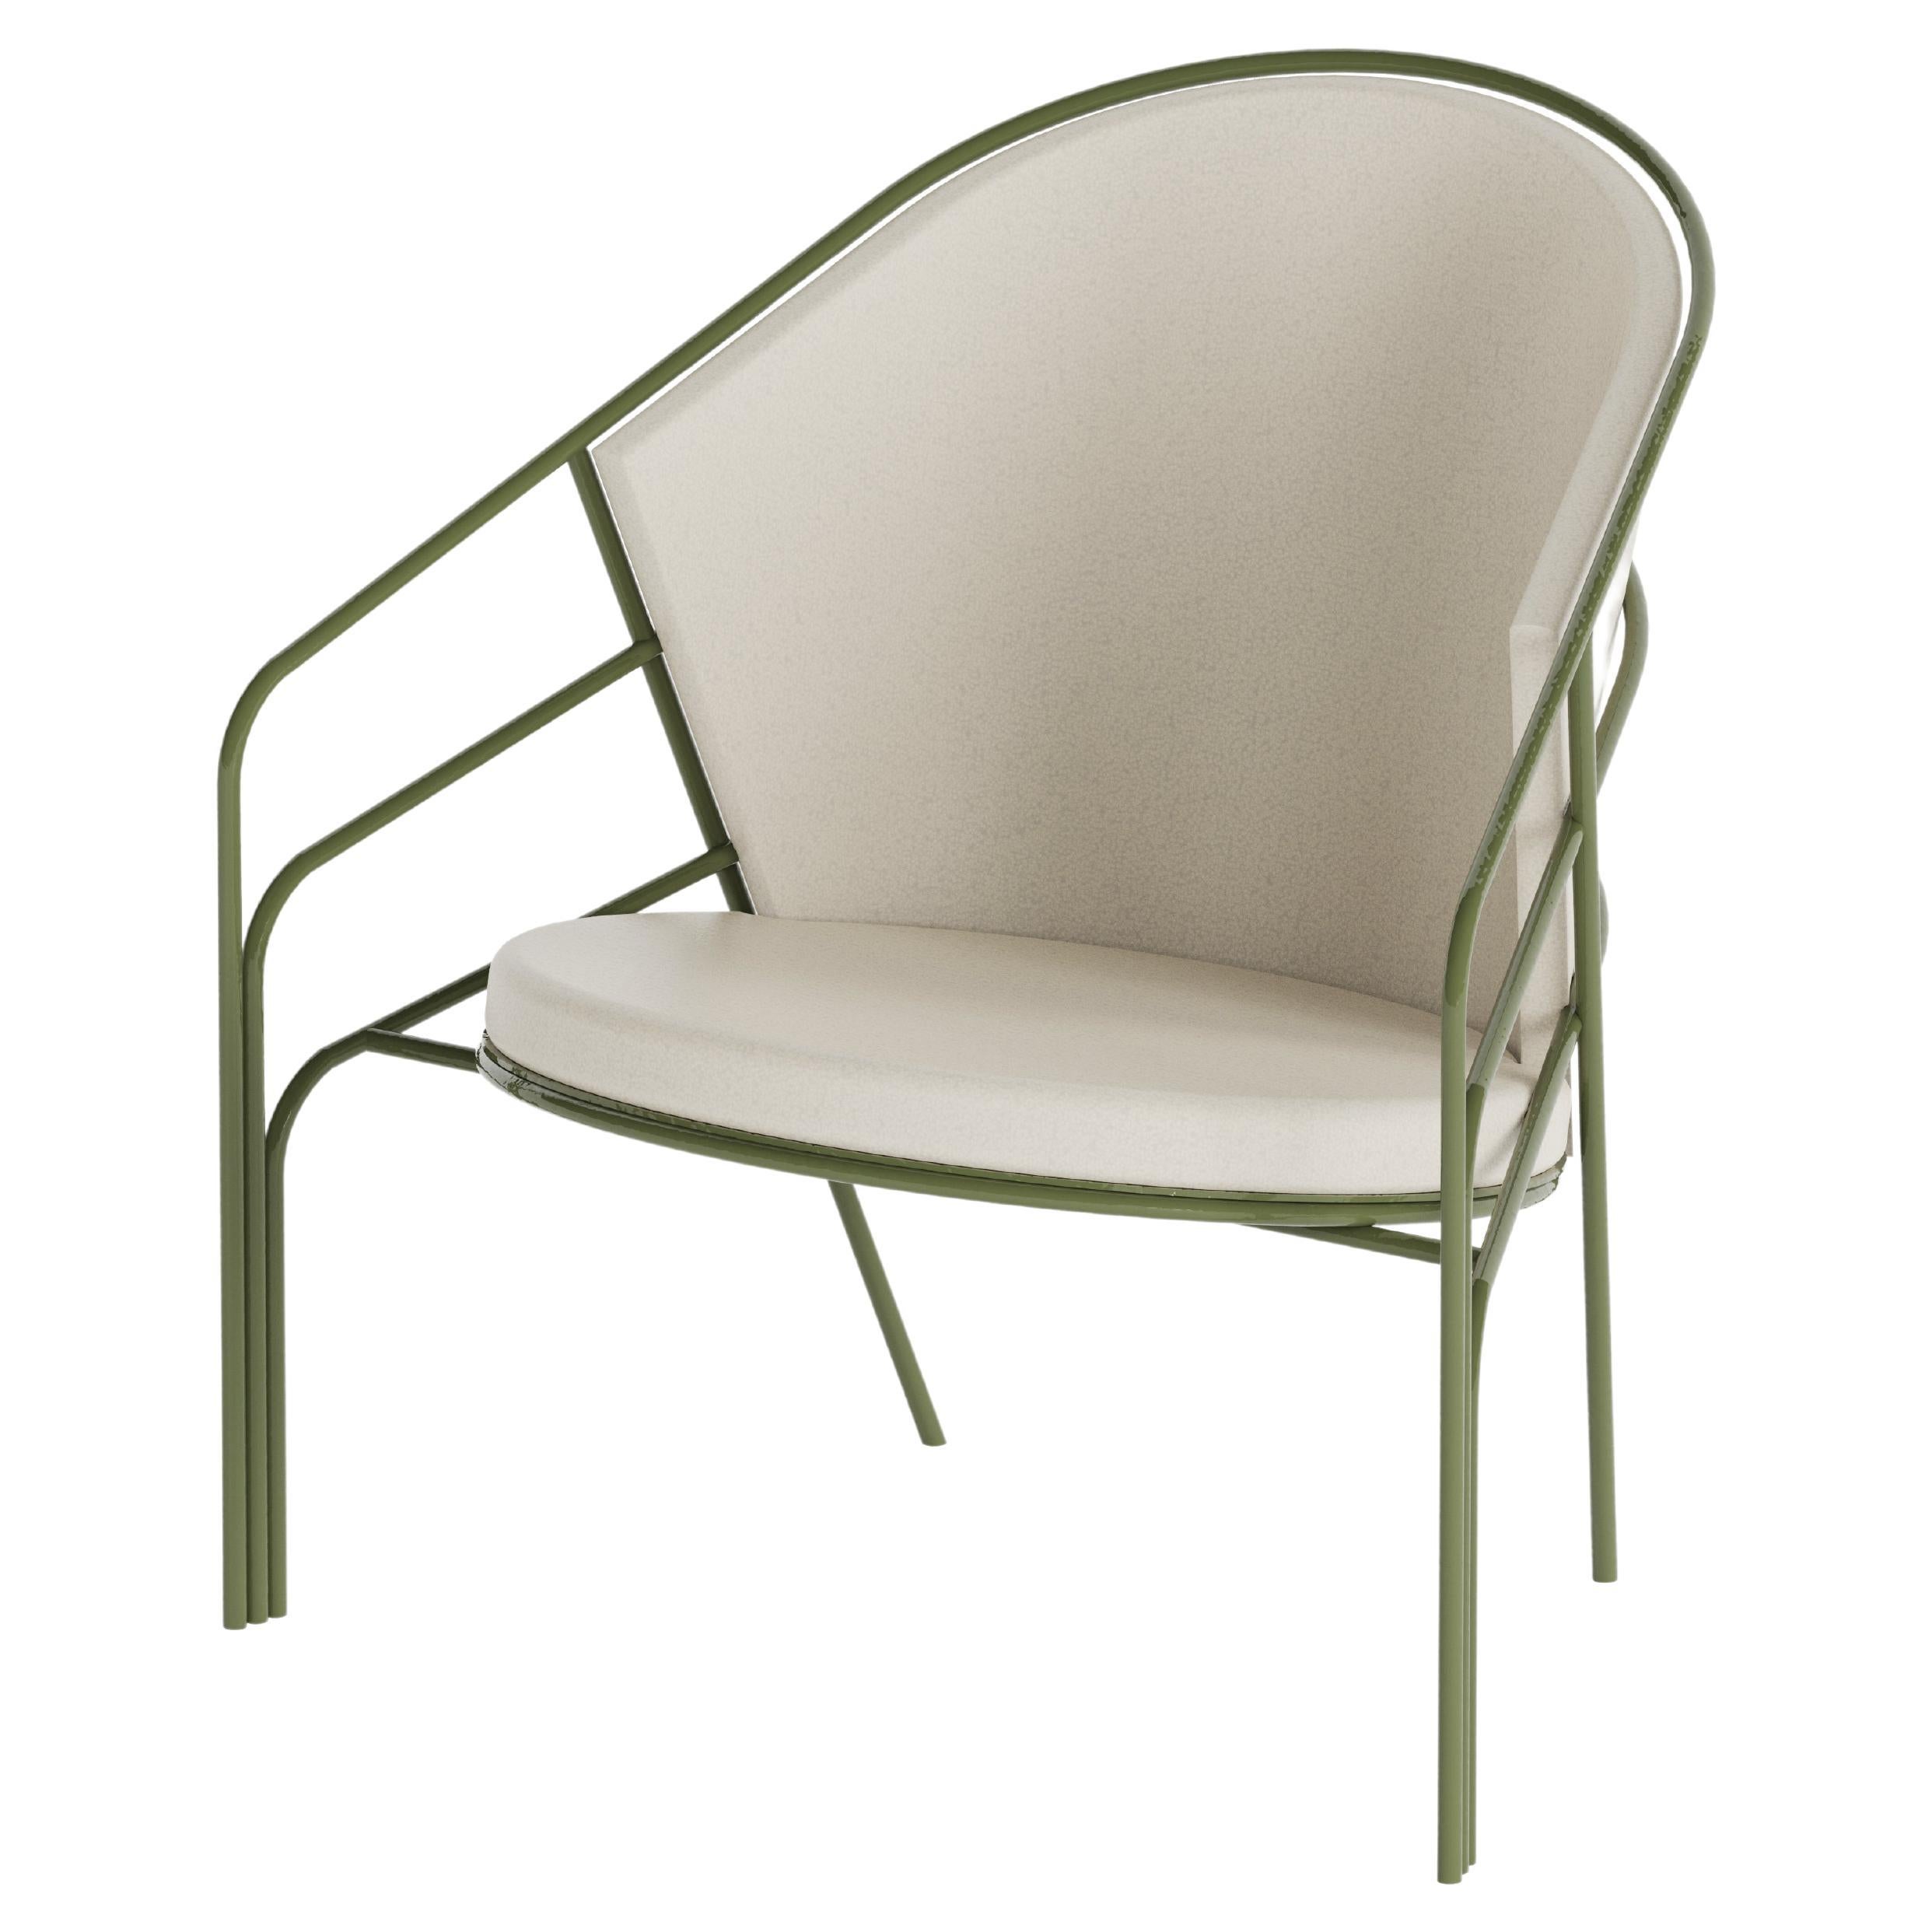 DeMille Outdoor Lounge Chair in Sage Powder-Coat with Cream Cushions